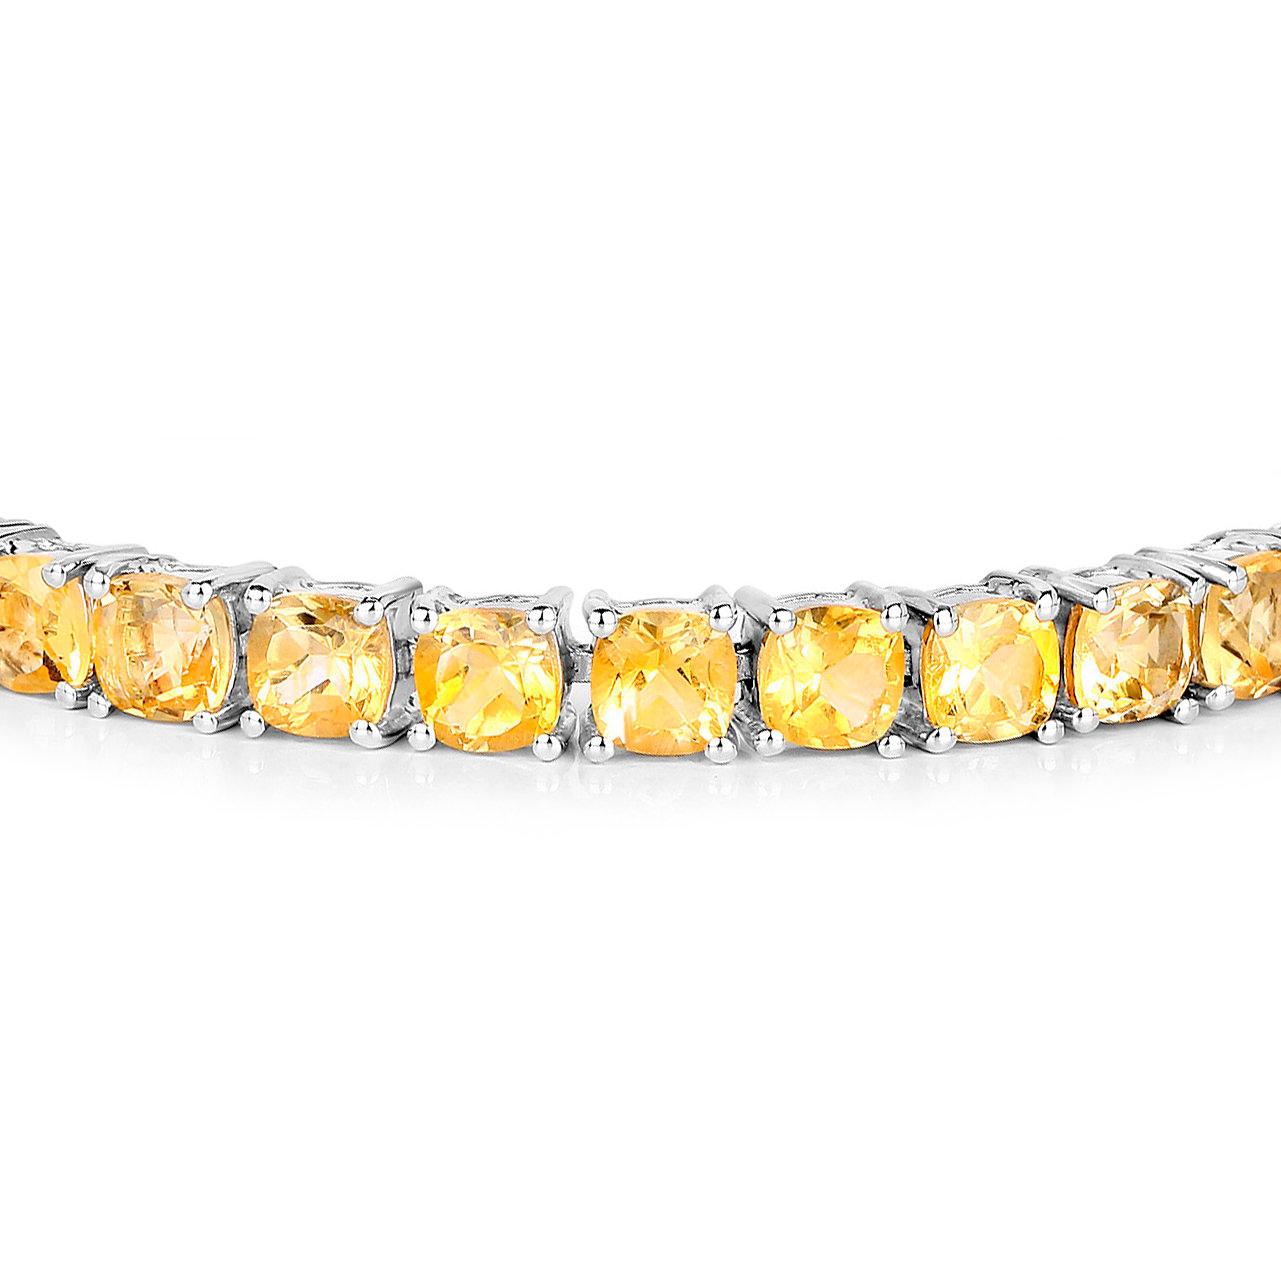 Cushion Cut Citrine Tennis Bracelet 17.60 Carats Rhodium Plated Sterling Silver For Sale